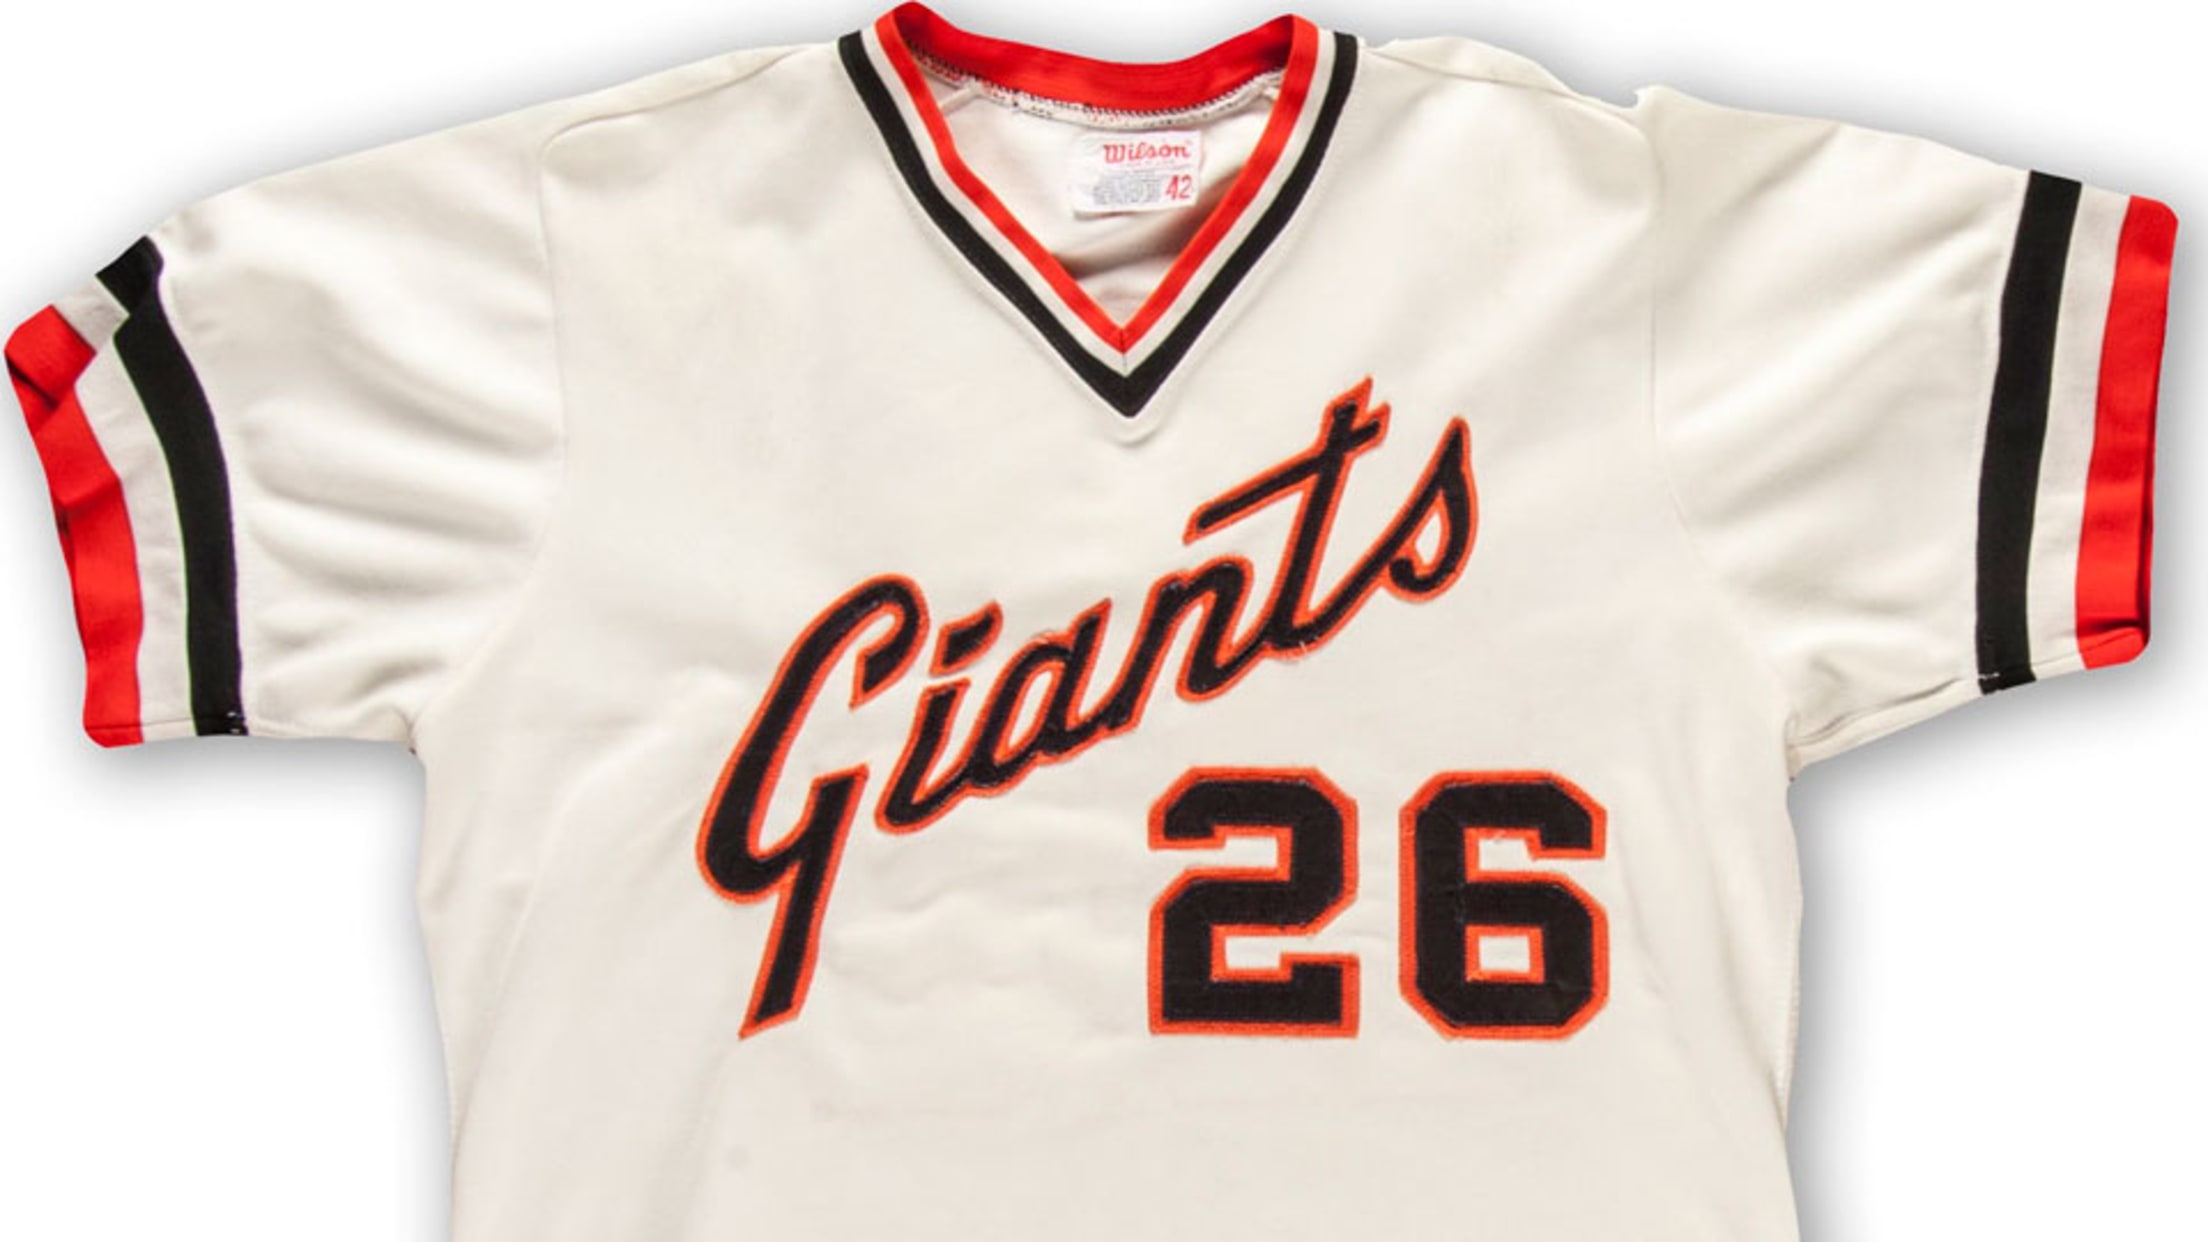 old sf giants uniforms